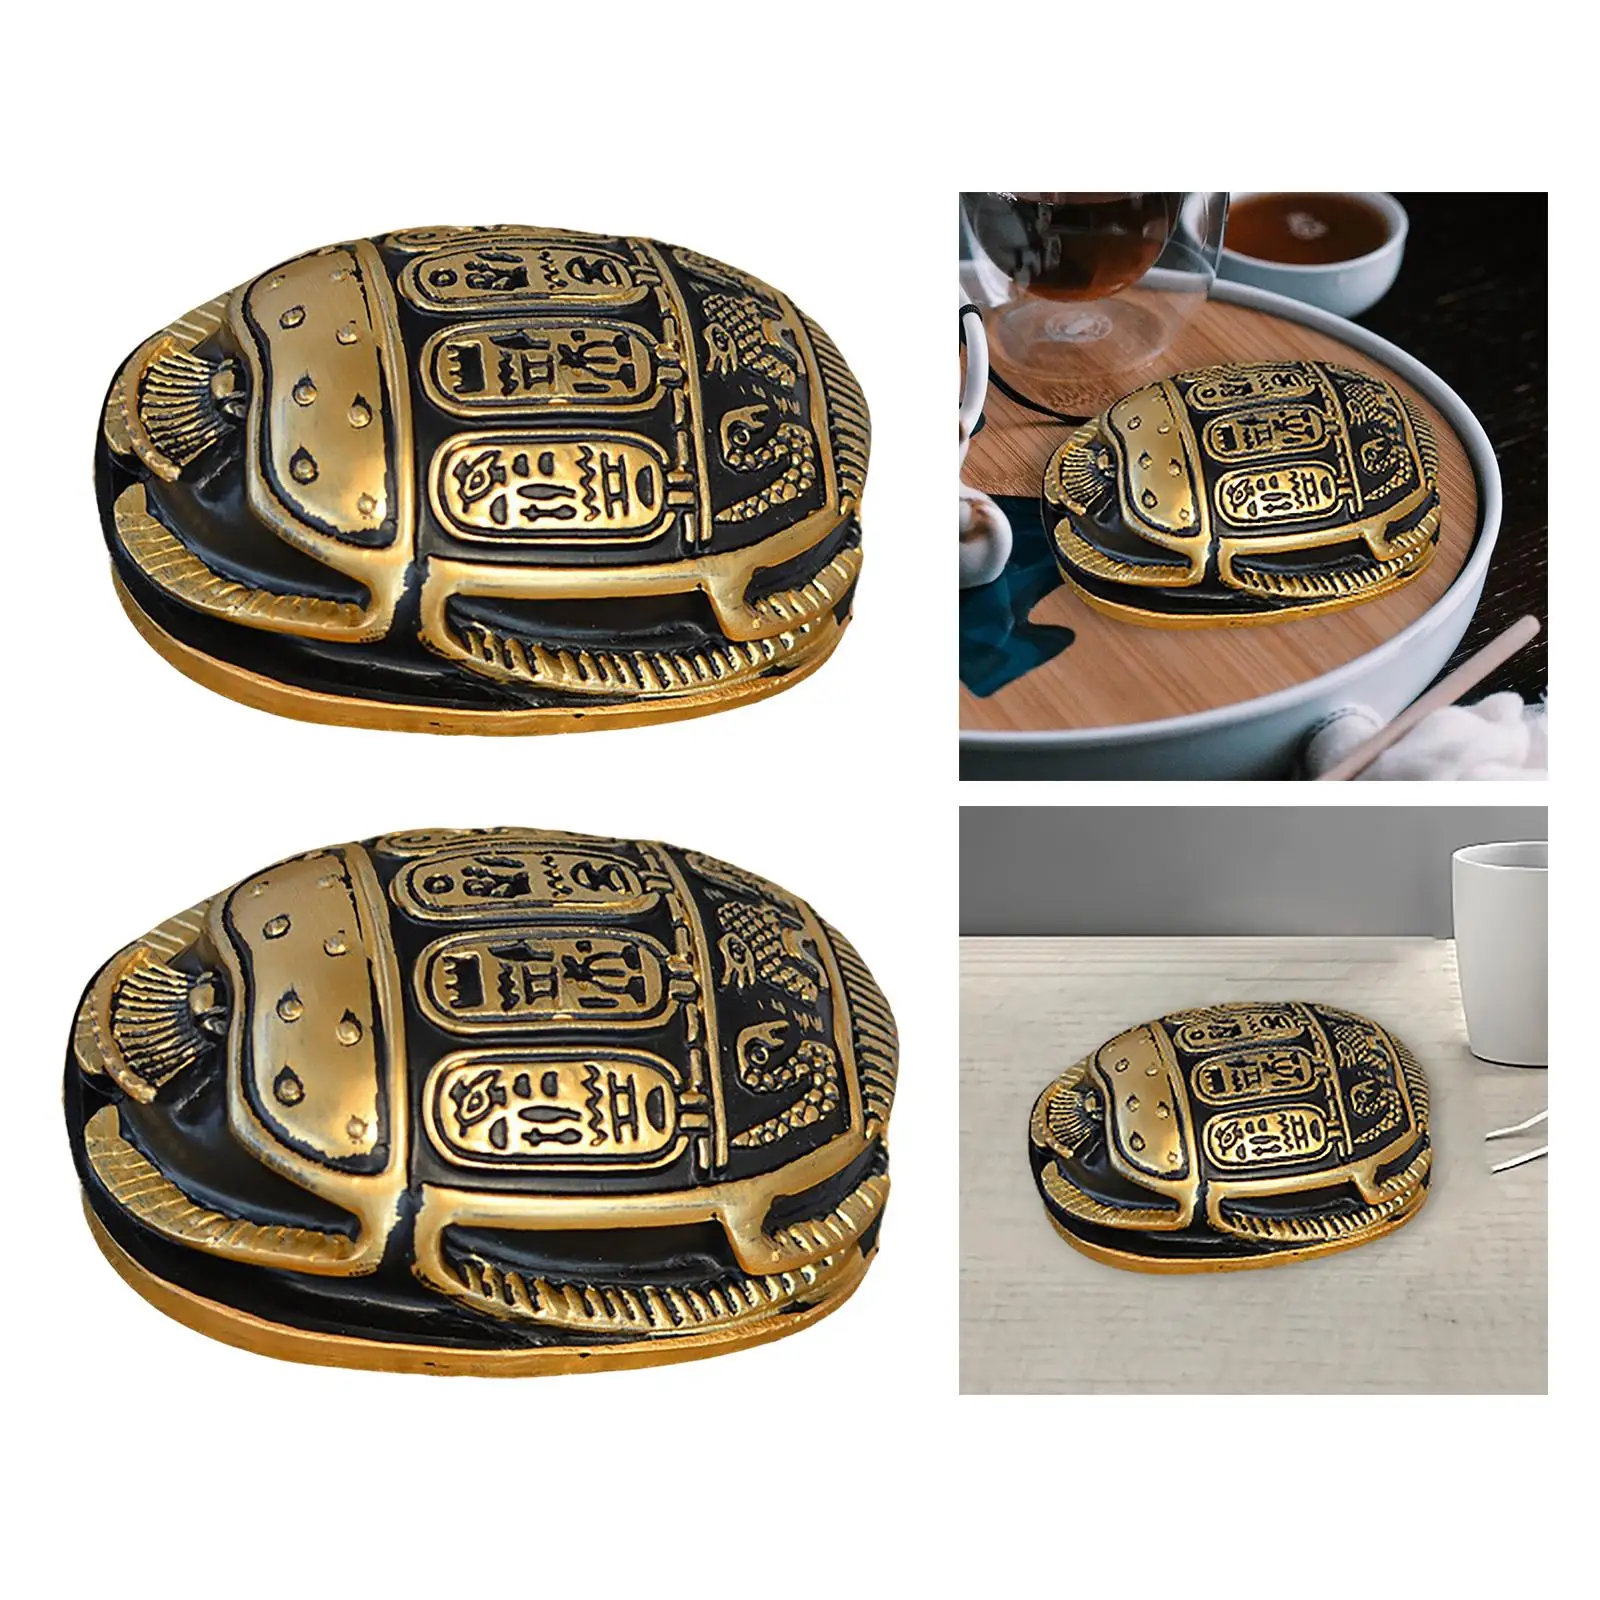 Classical Egypt Scarab Ornament Beetle Sculpture Adornment Craft Statue Resin